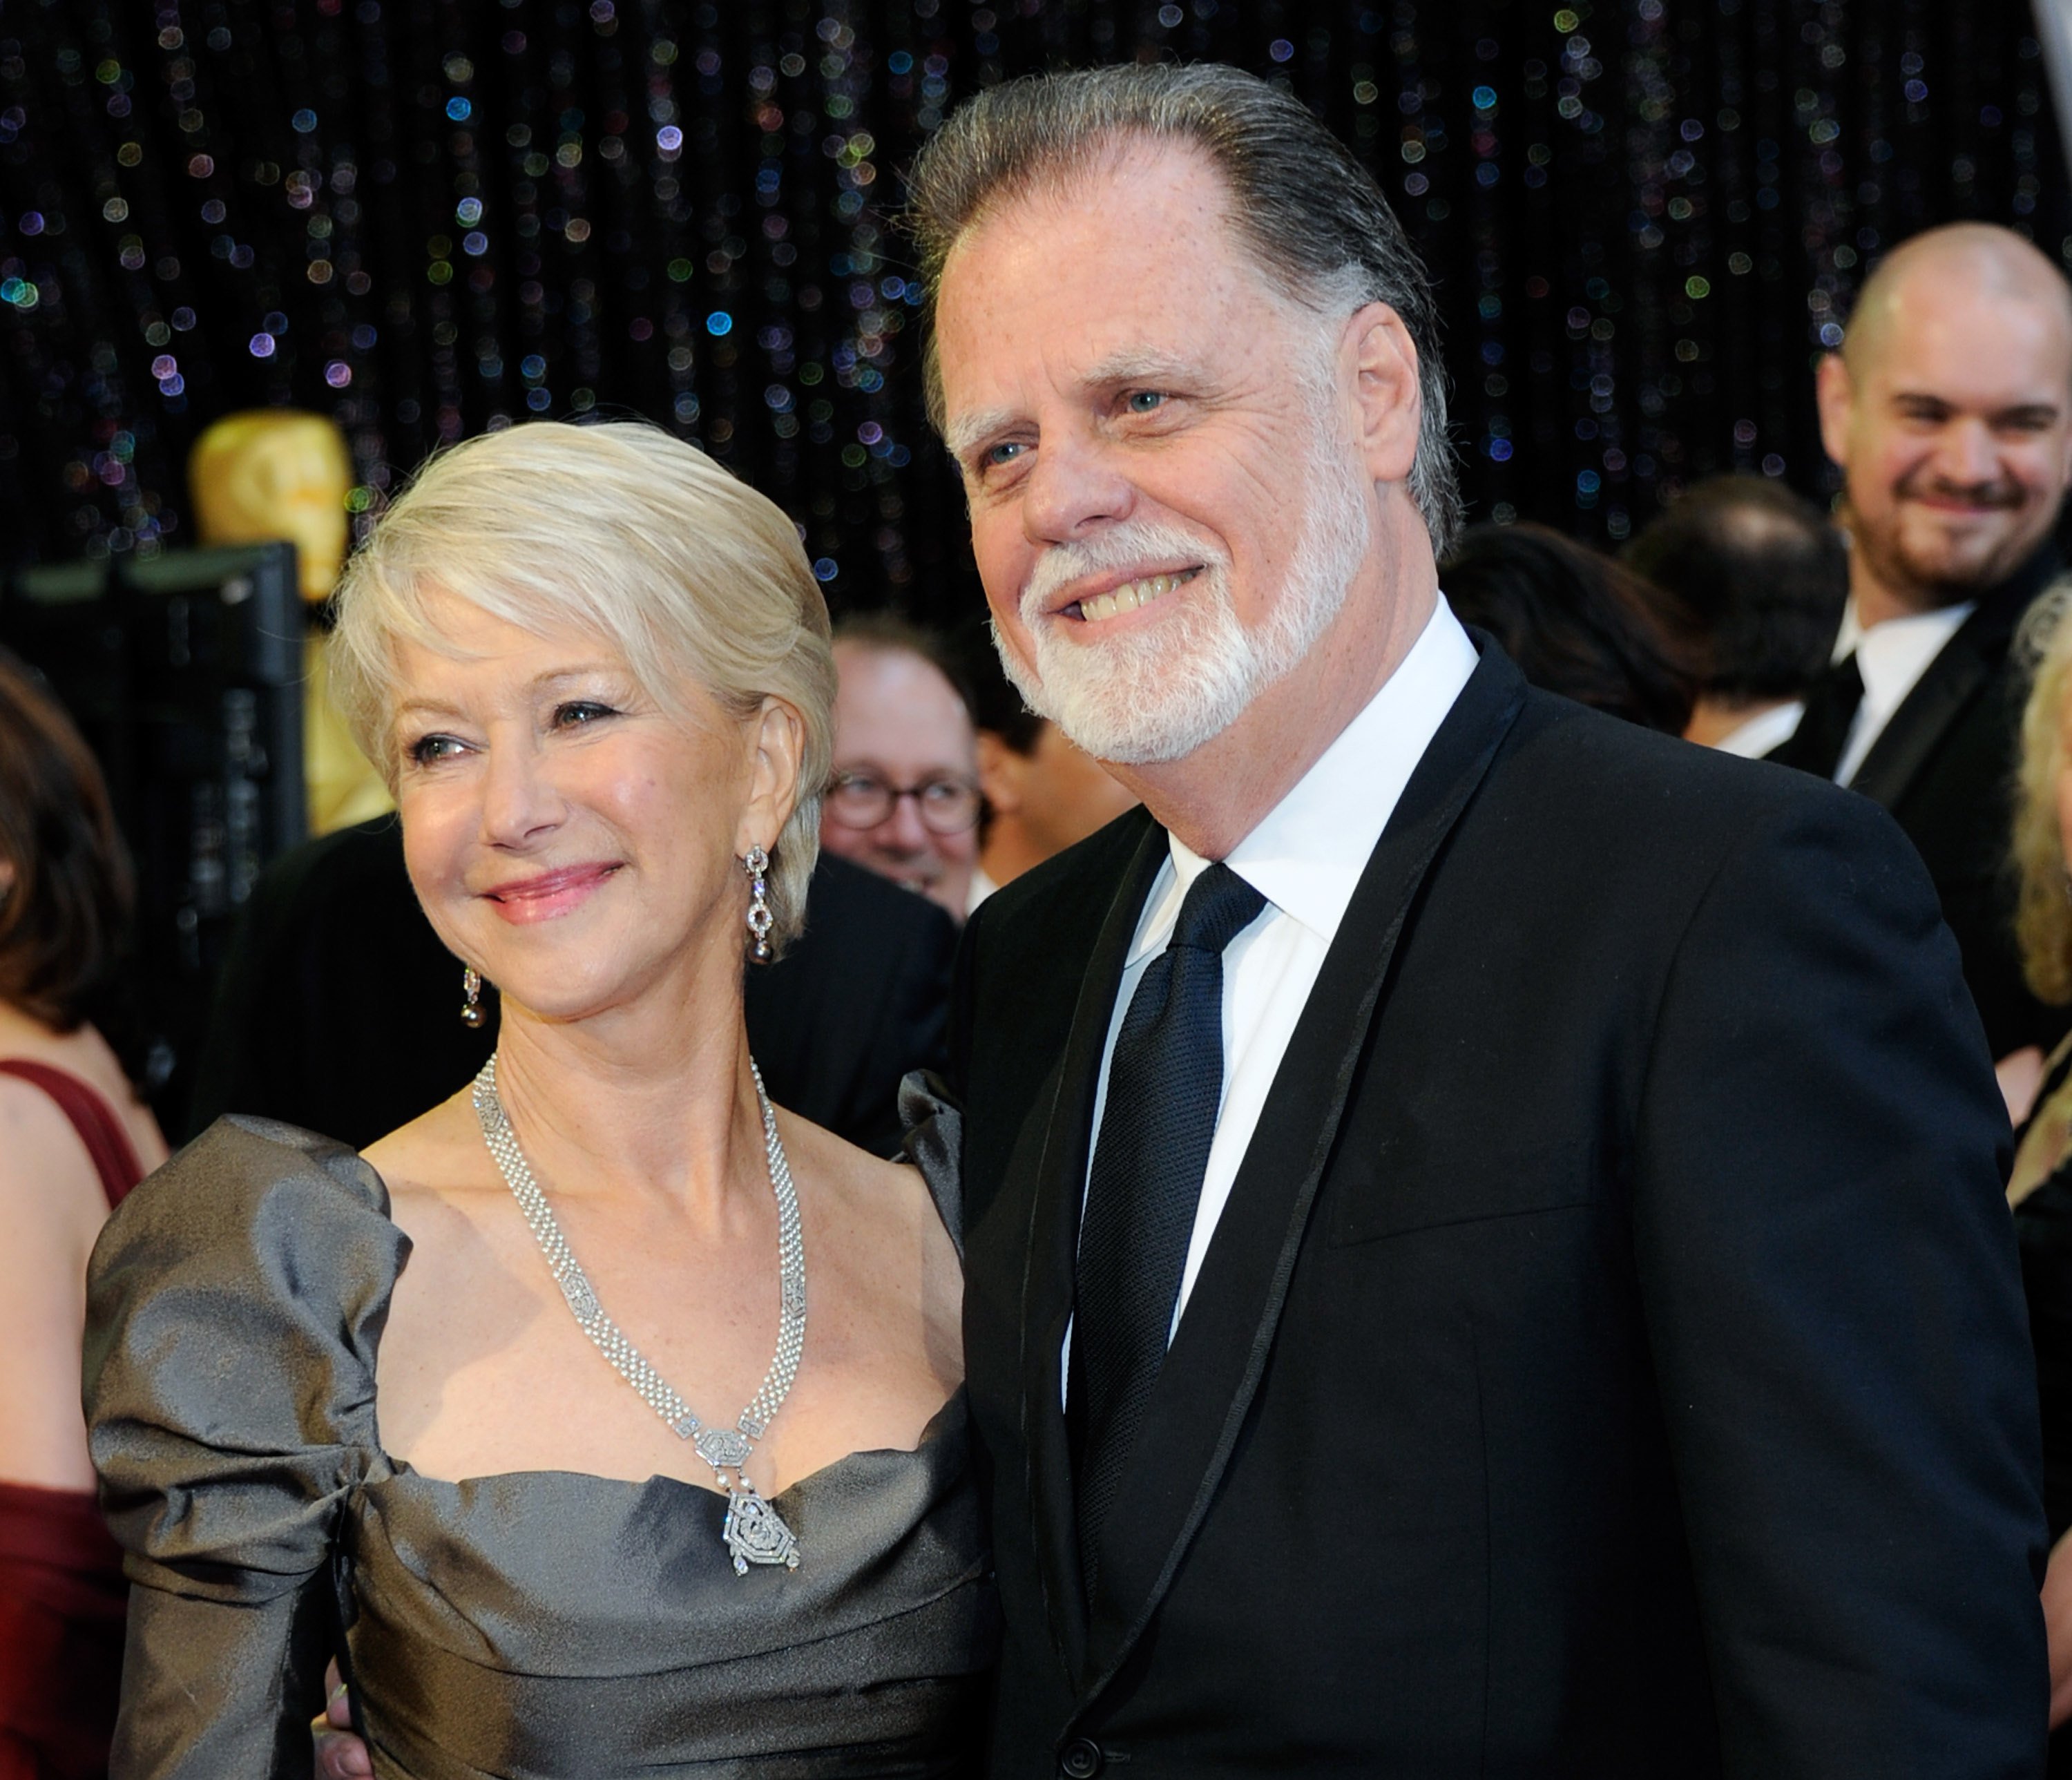 Helen Mirren and Taylor Hackford at the 83rd Annual Academy Awards on February 27, 2011, in Hollywood, California. | Source: Ethan Miller/Getty Images